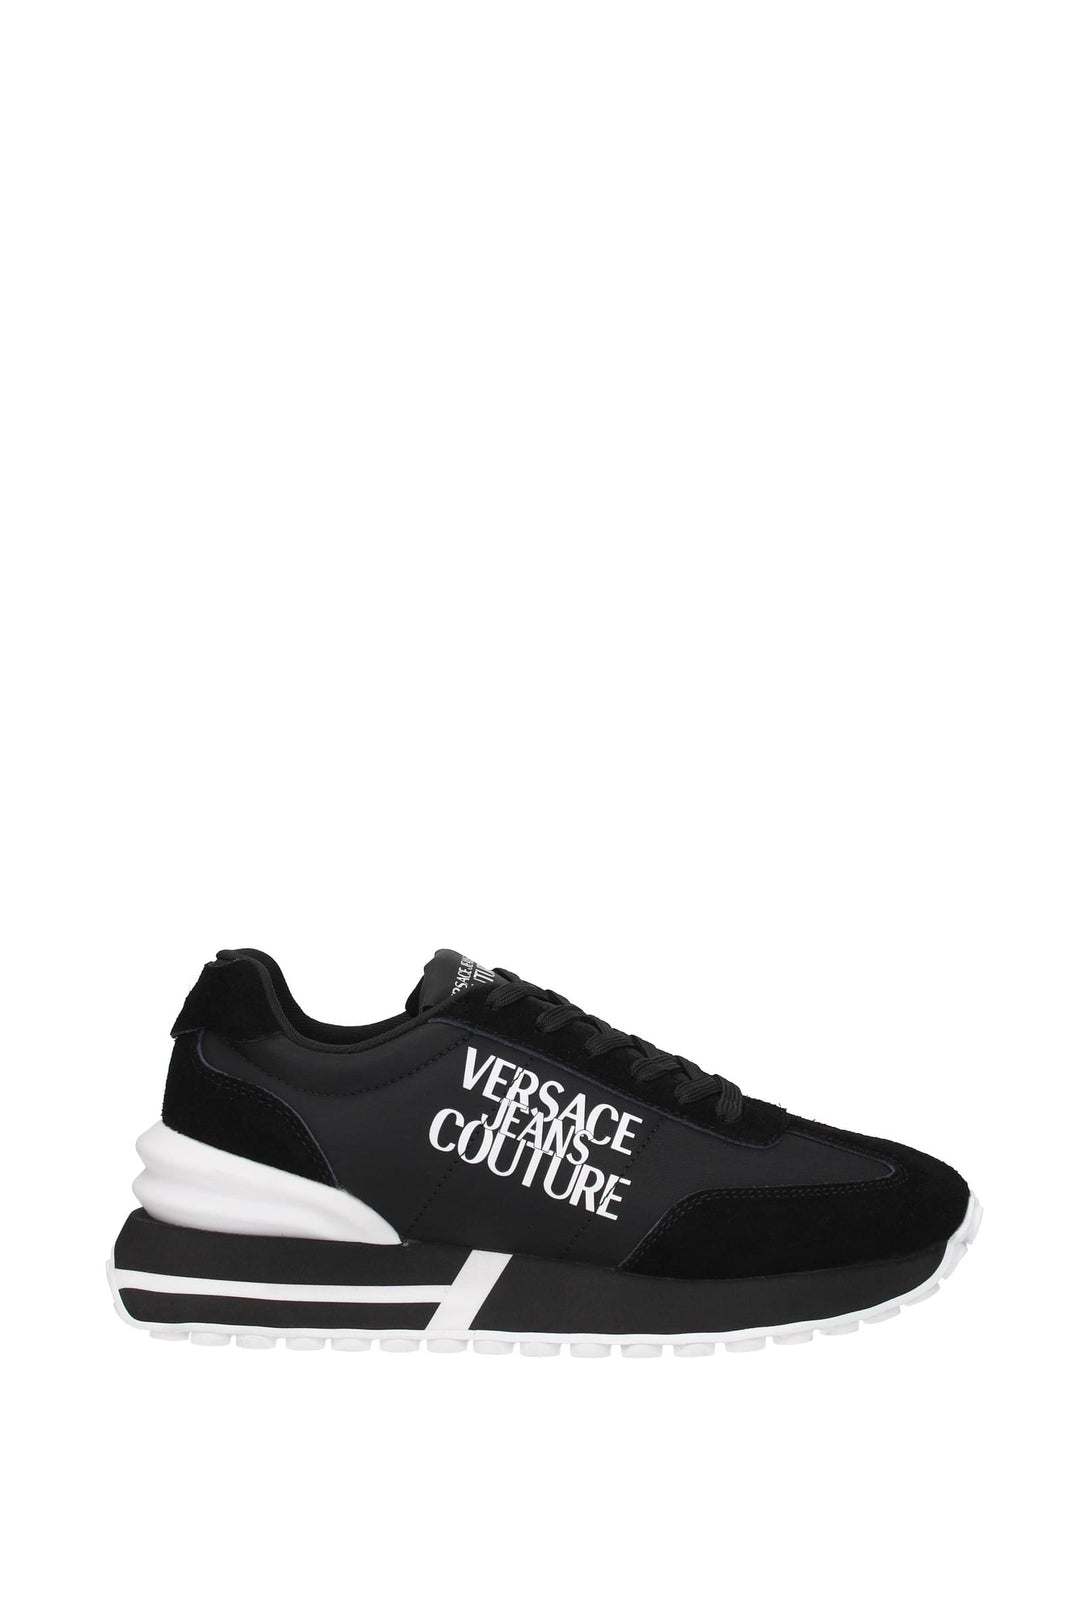 Versace Jeans Sneakers Couture Tessuto Nero - Versace Jeans Couture - Uomo